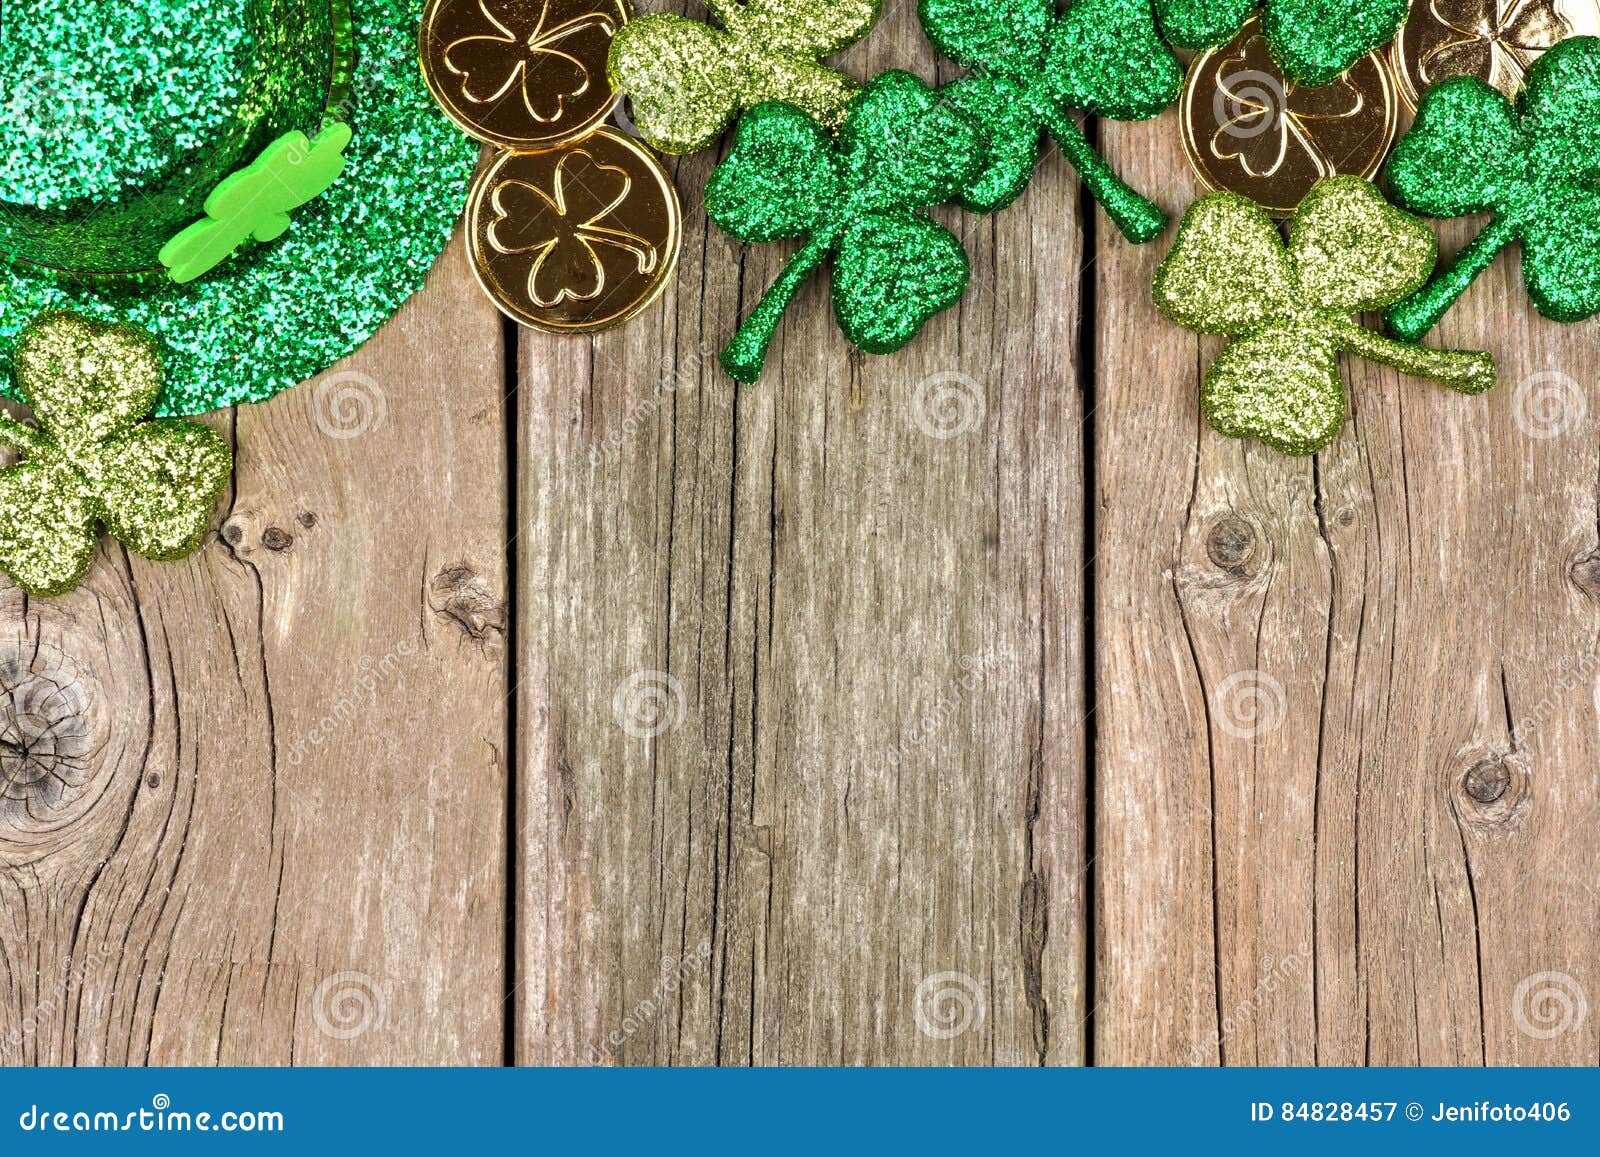 Leowefowa St.Patricks Day Backdrop 12x8ft Shamrock Clovers Leprechaun Hat Gold Coins Ornaments Rustic Wood Plank Photography Background Children Kids Baby Photo Shoot Event Activities Photo Booth 